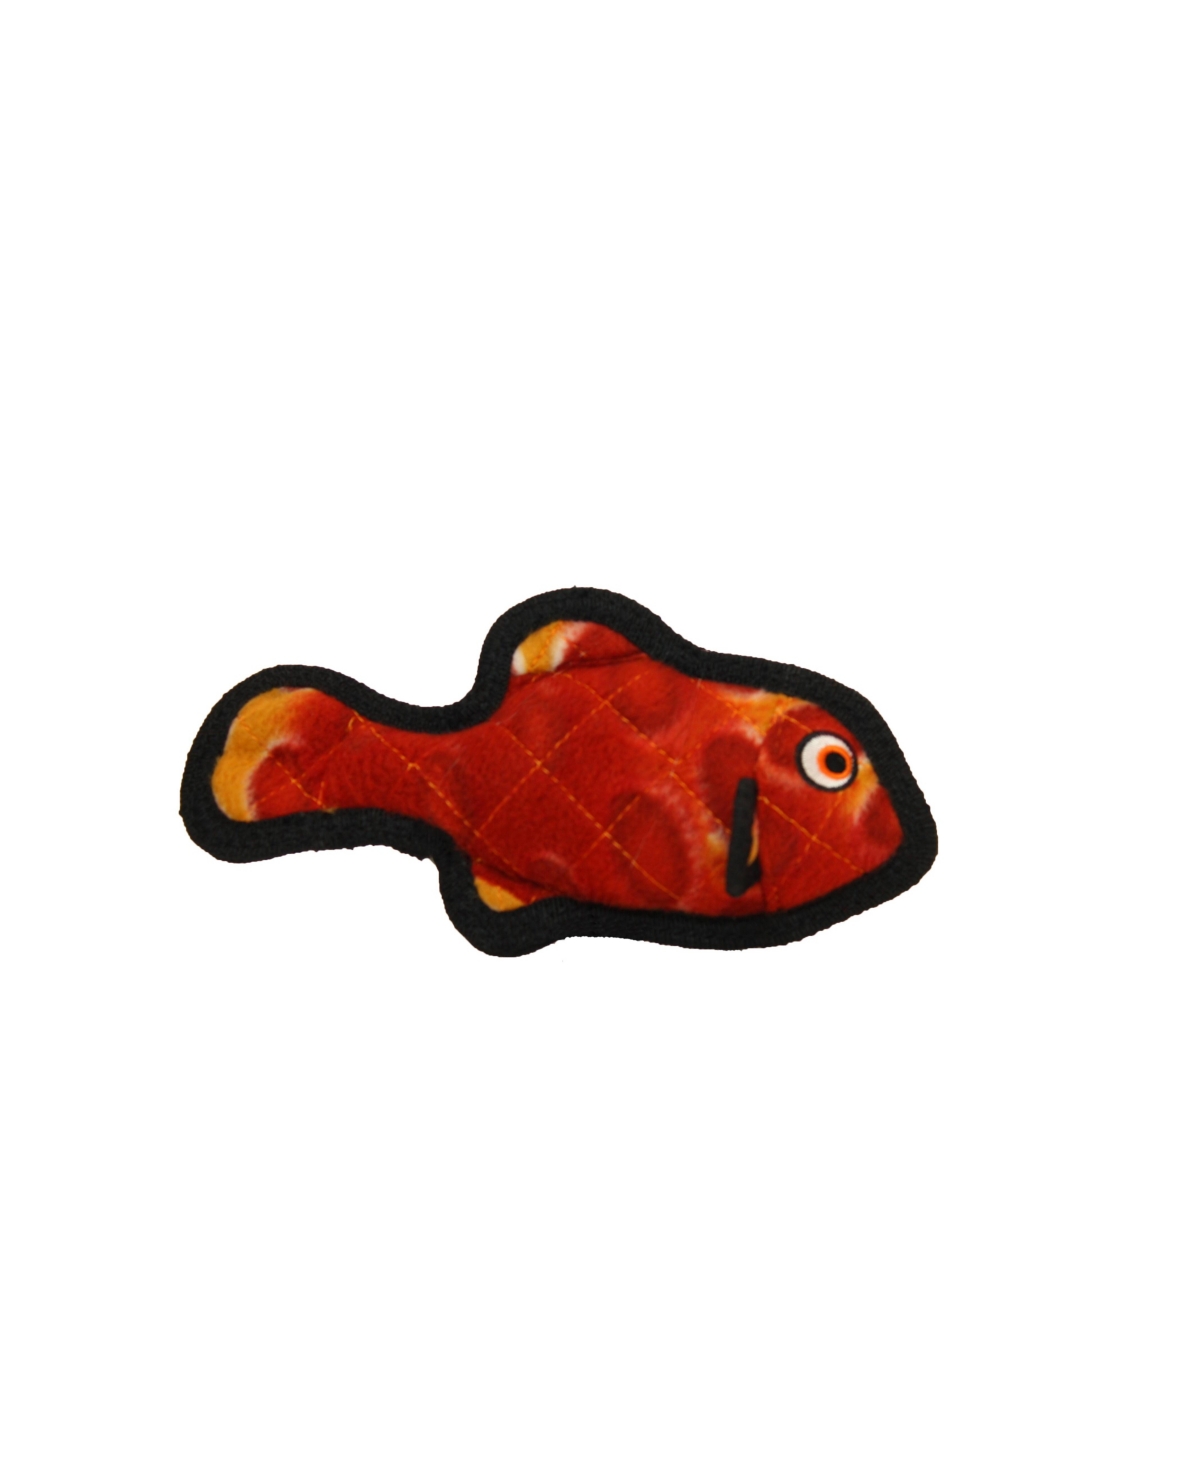 Ocean Creature Jr Fish Red, Dog Toy - Red